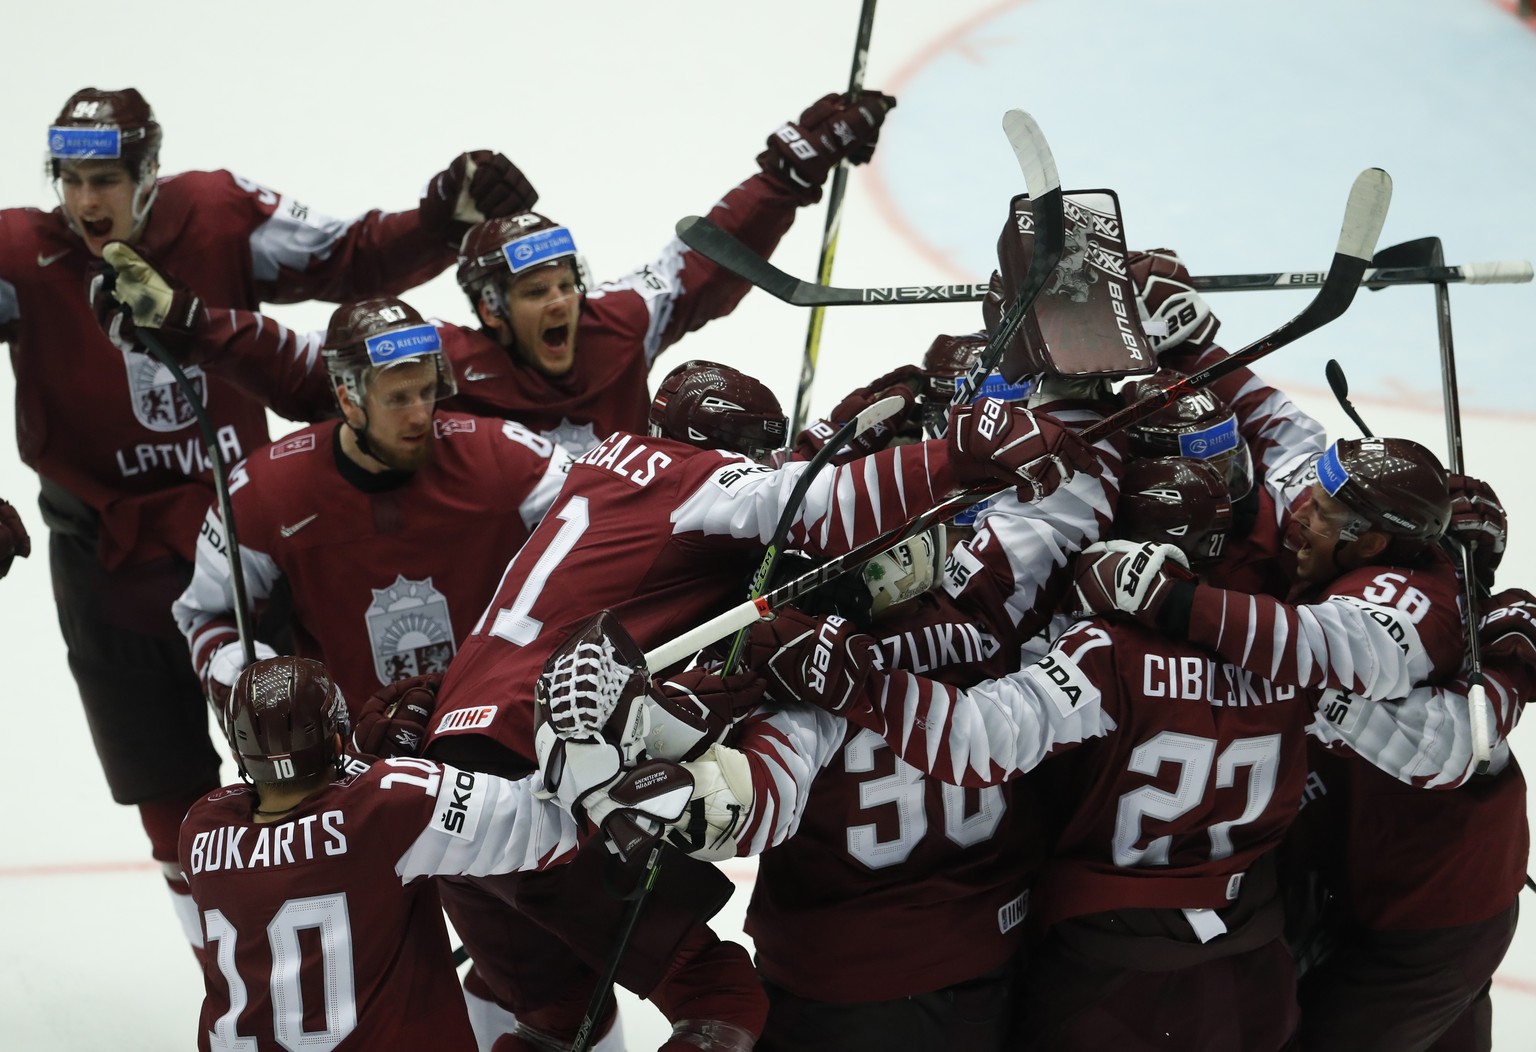 Players of Latvia celebrate after the Ice Hockey World Championships group B match between Denmark and Latvia at the Jyske Bank Boxen arena in Herning, Denmark, Tuesday, May 15, 2018. (AP Photo/Petr D ...